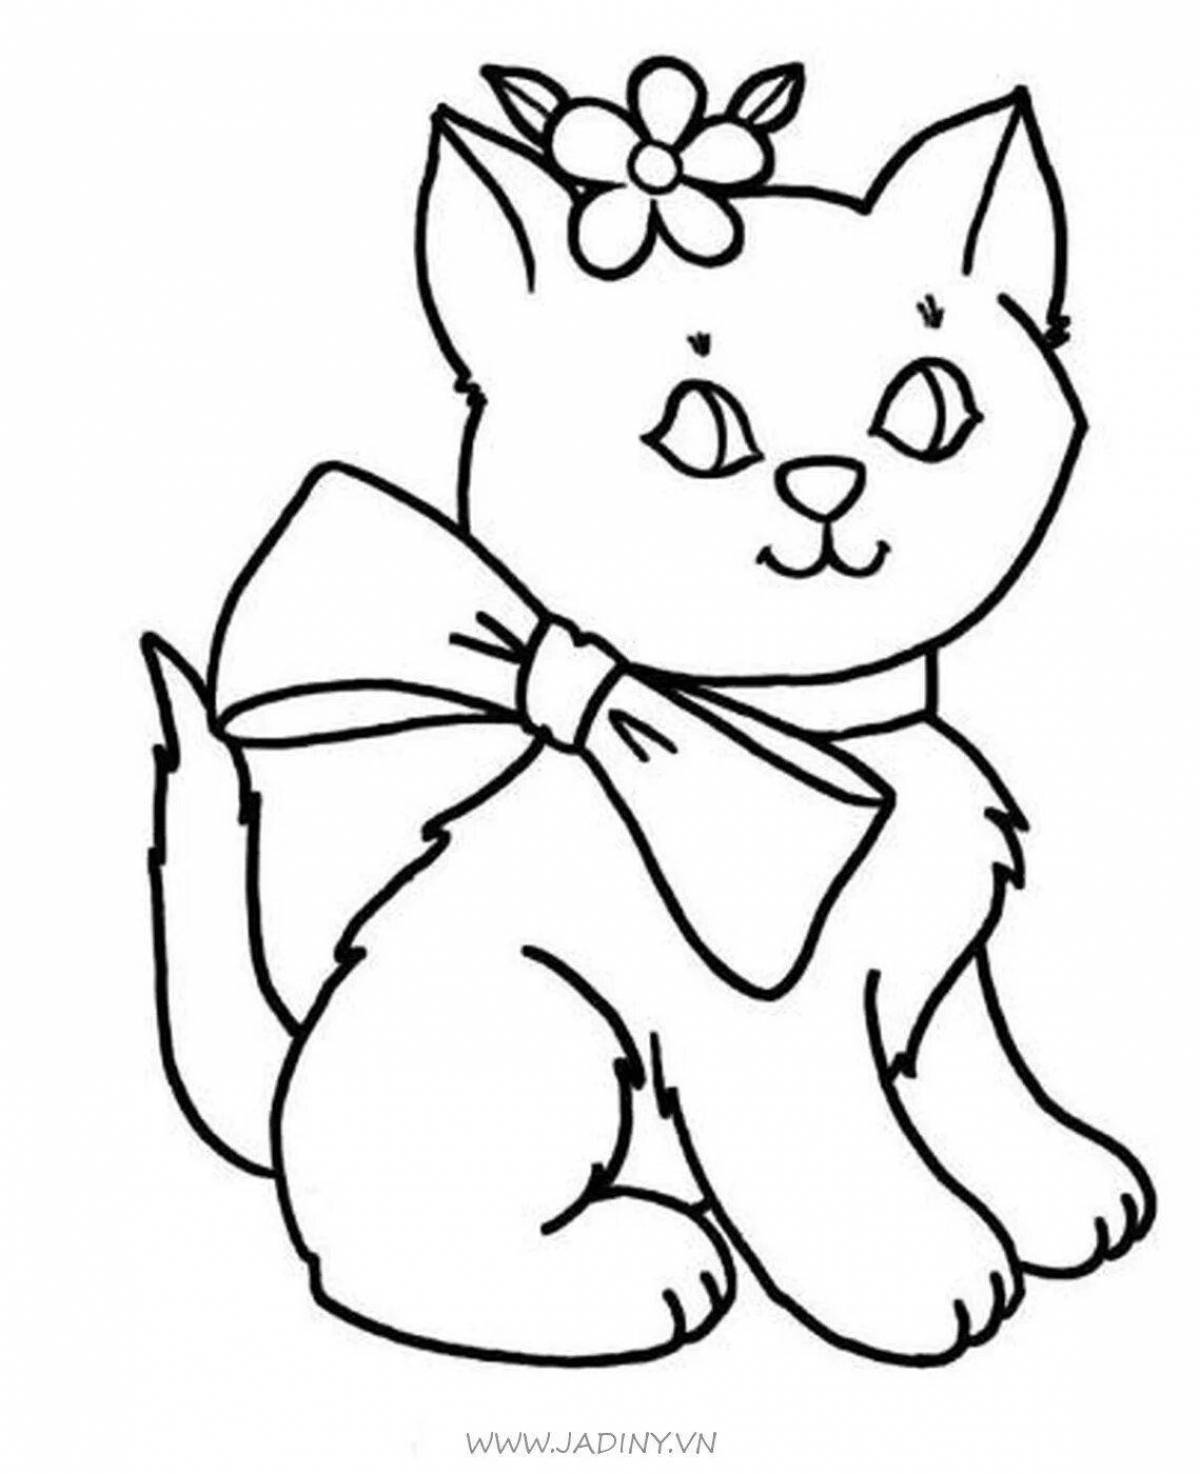 Fancy kittens coloring book for kids 6-7 years old